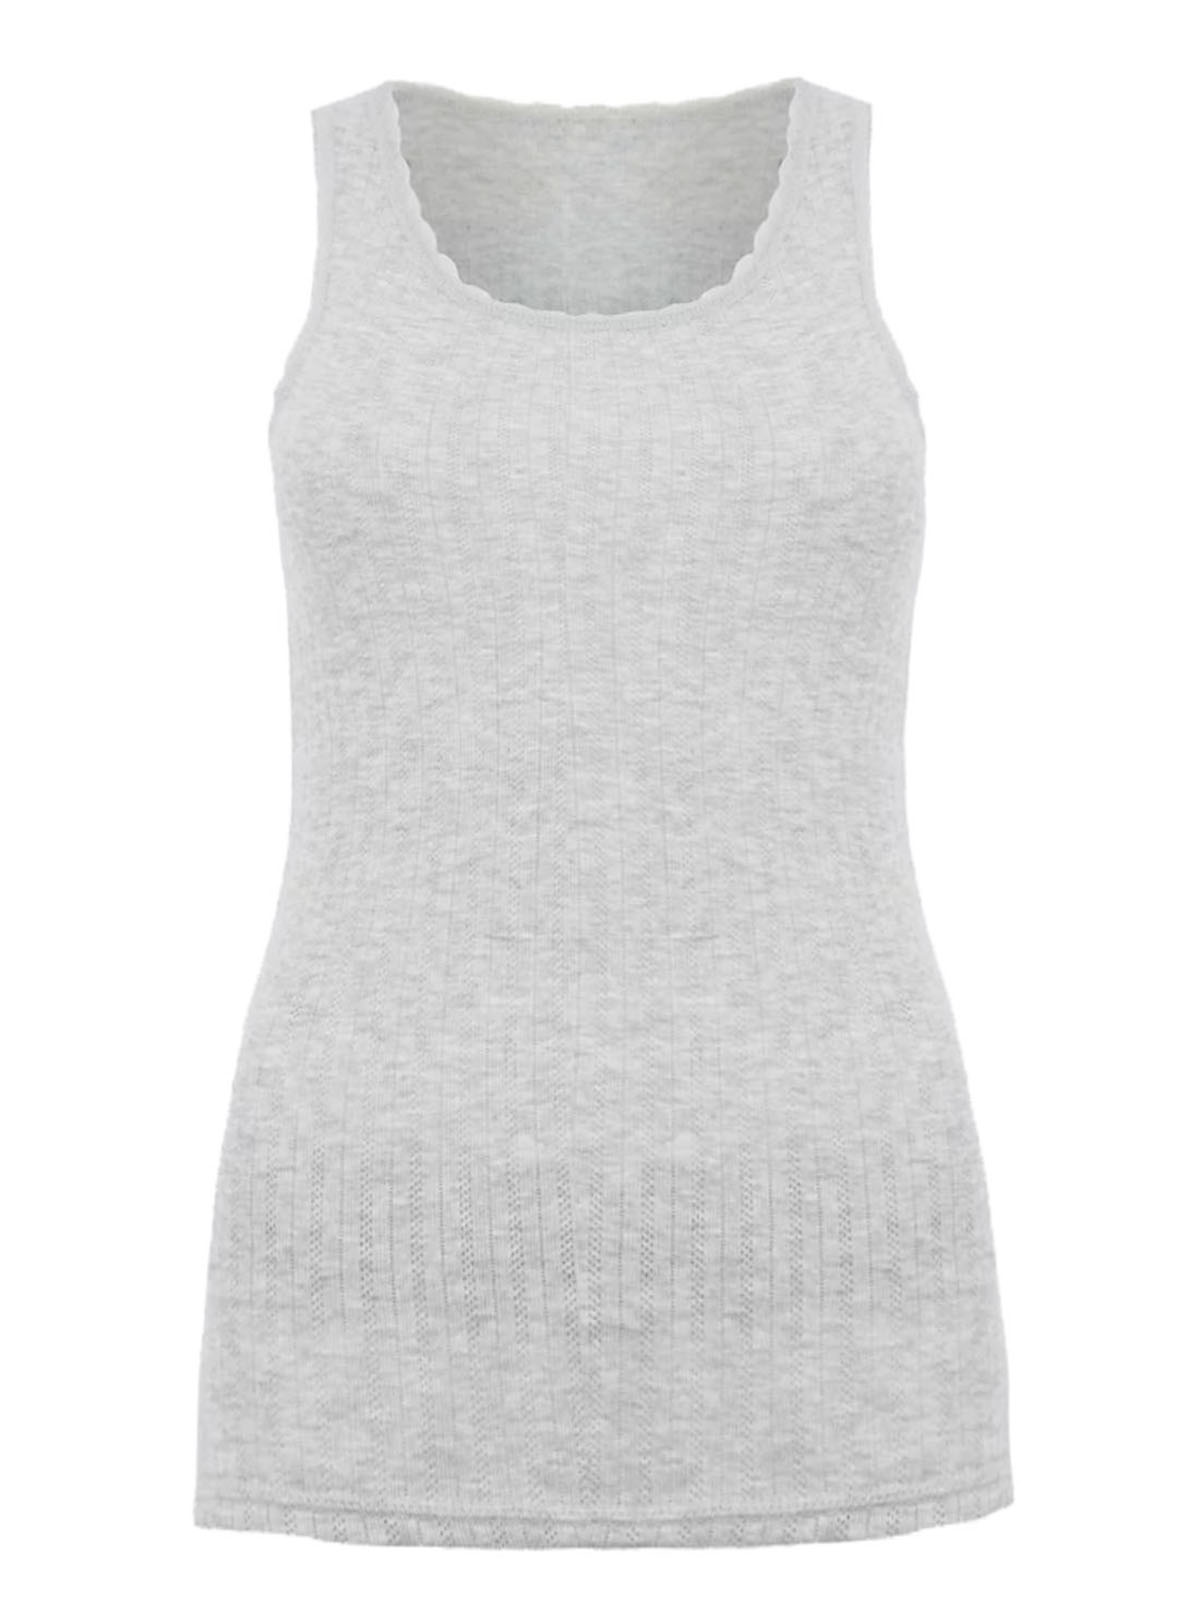 Marks and Spencer - - M&5 GREY Thermal Pointelle Vest - Size 6 to 22